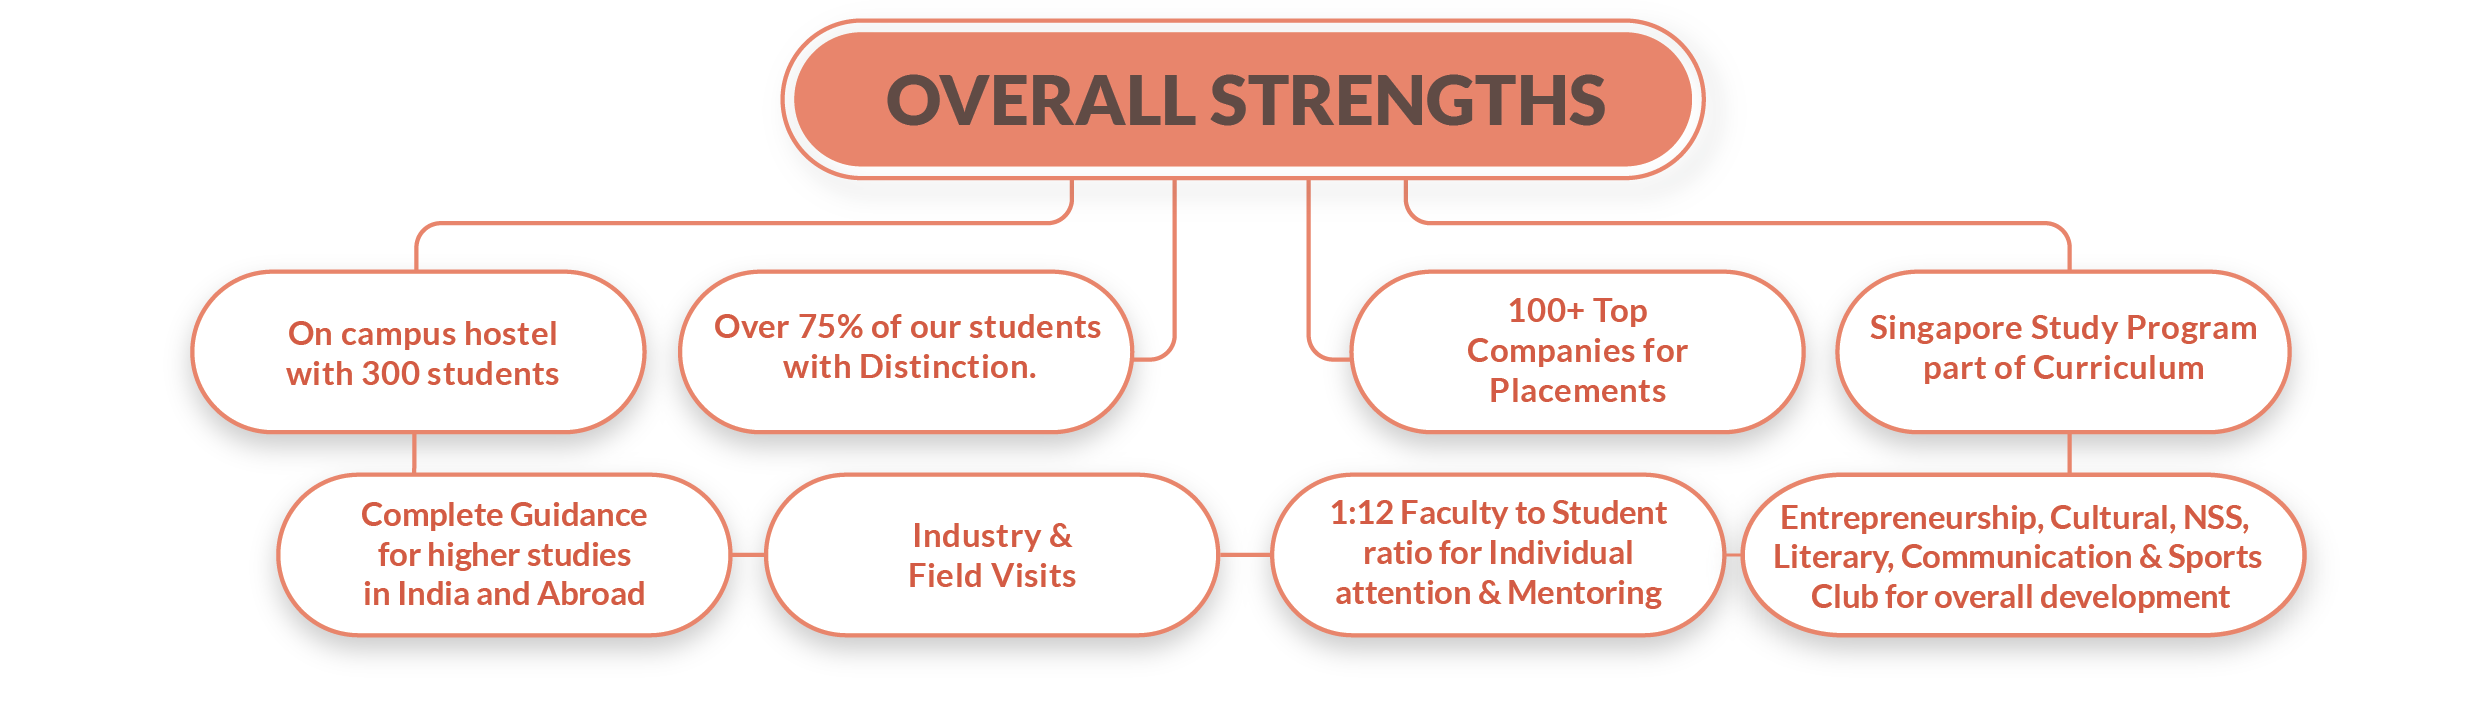 overall strengths